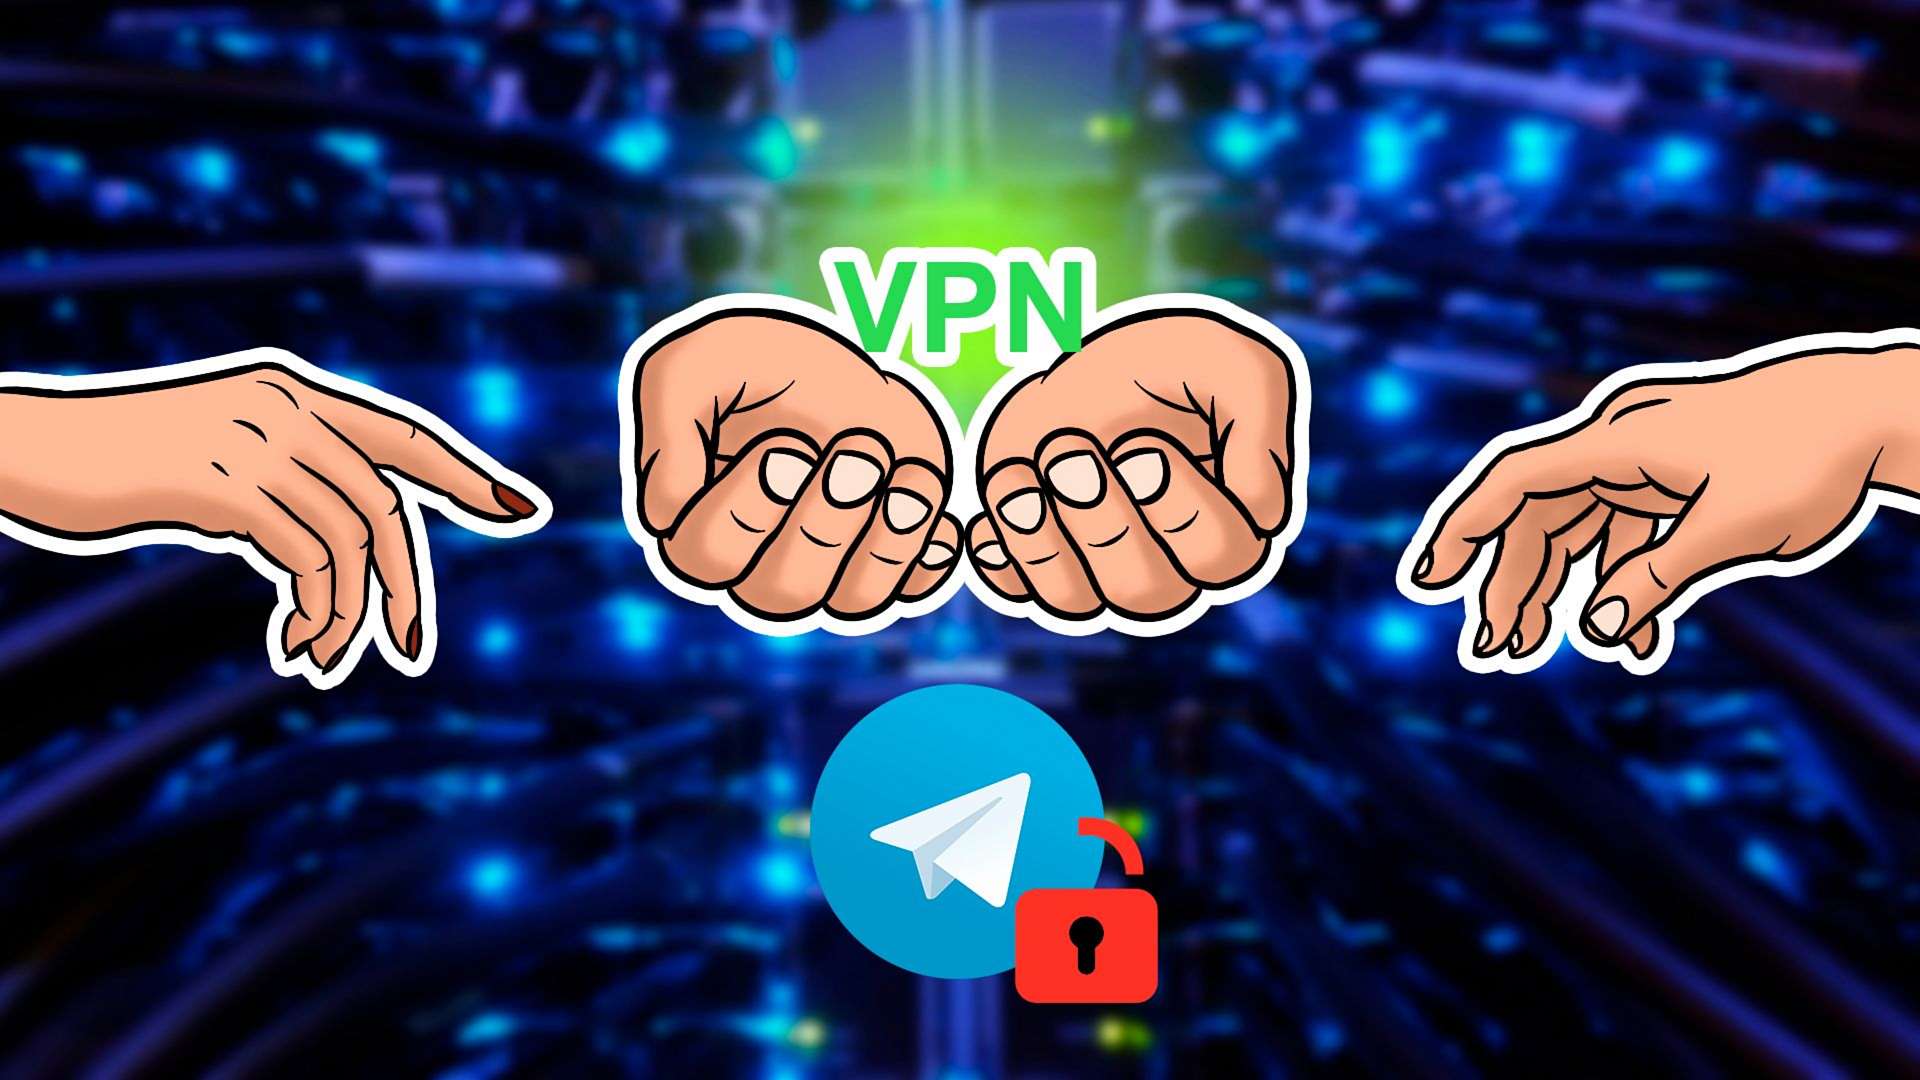 The Telegram blockage dramatically increased the demand for VPN services in data centers